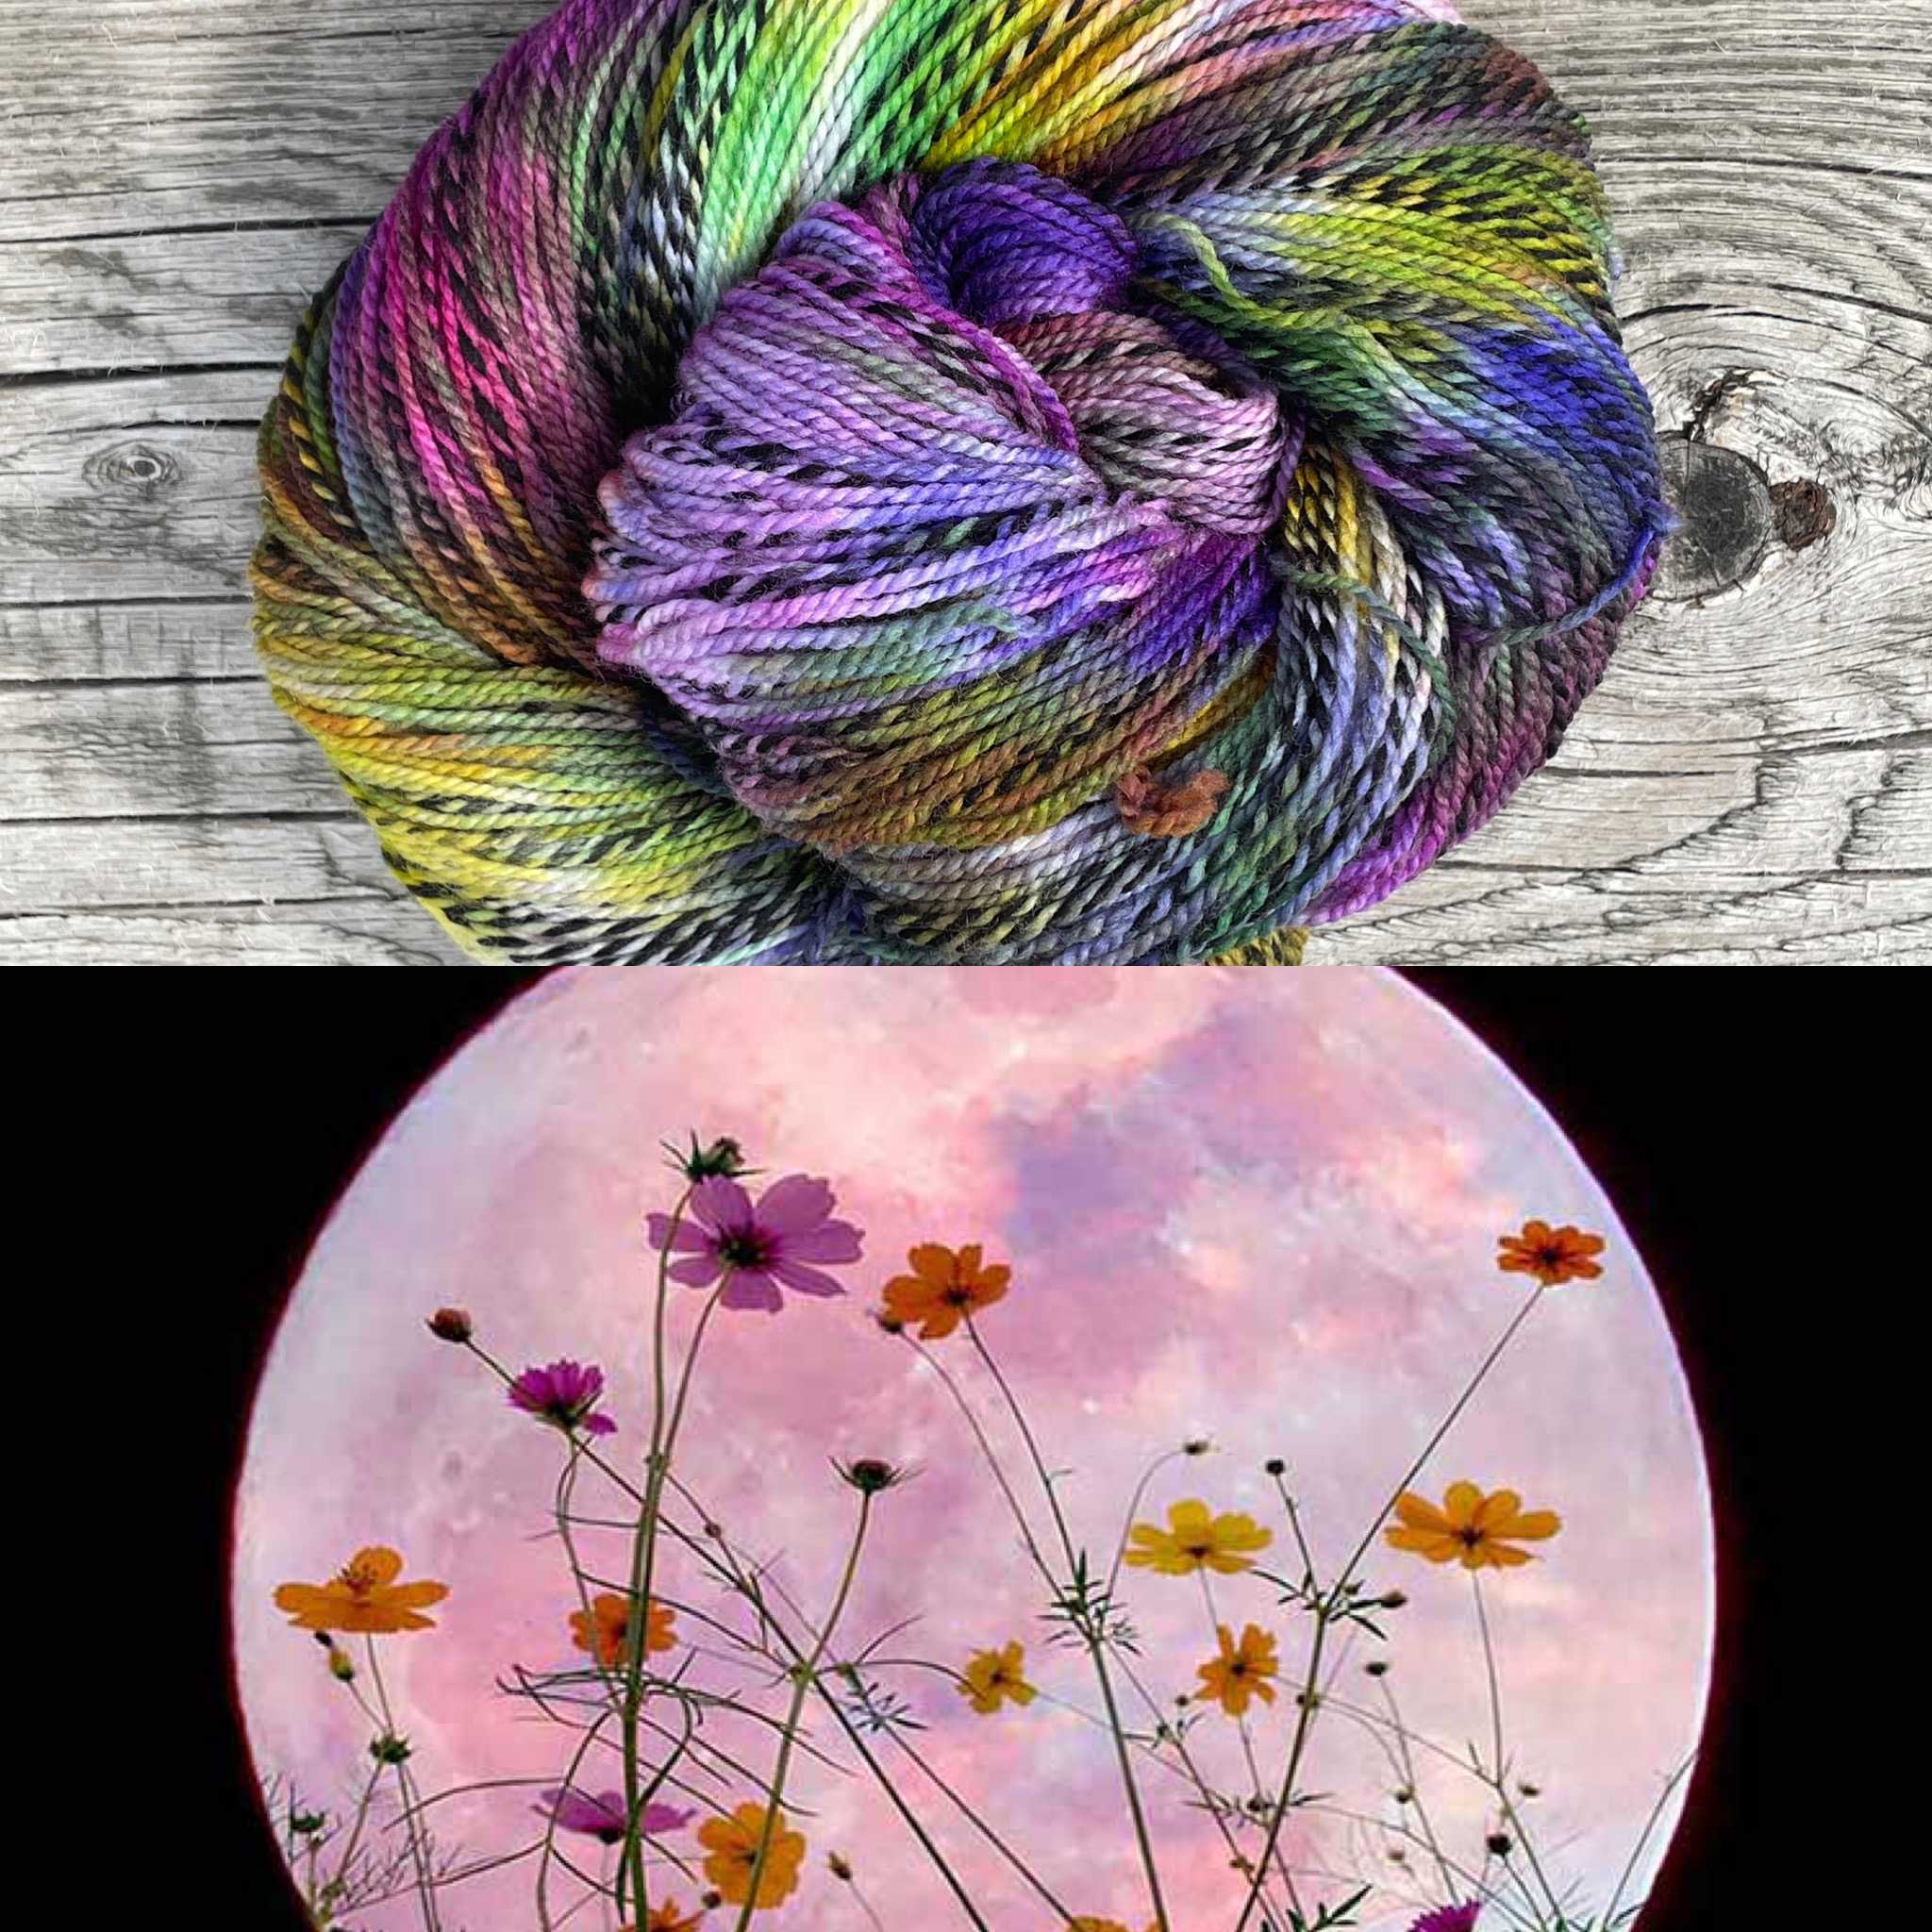 A skein of rainbow yarn above a photo of wildflowers in front of the moon.